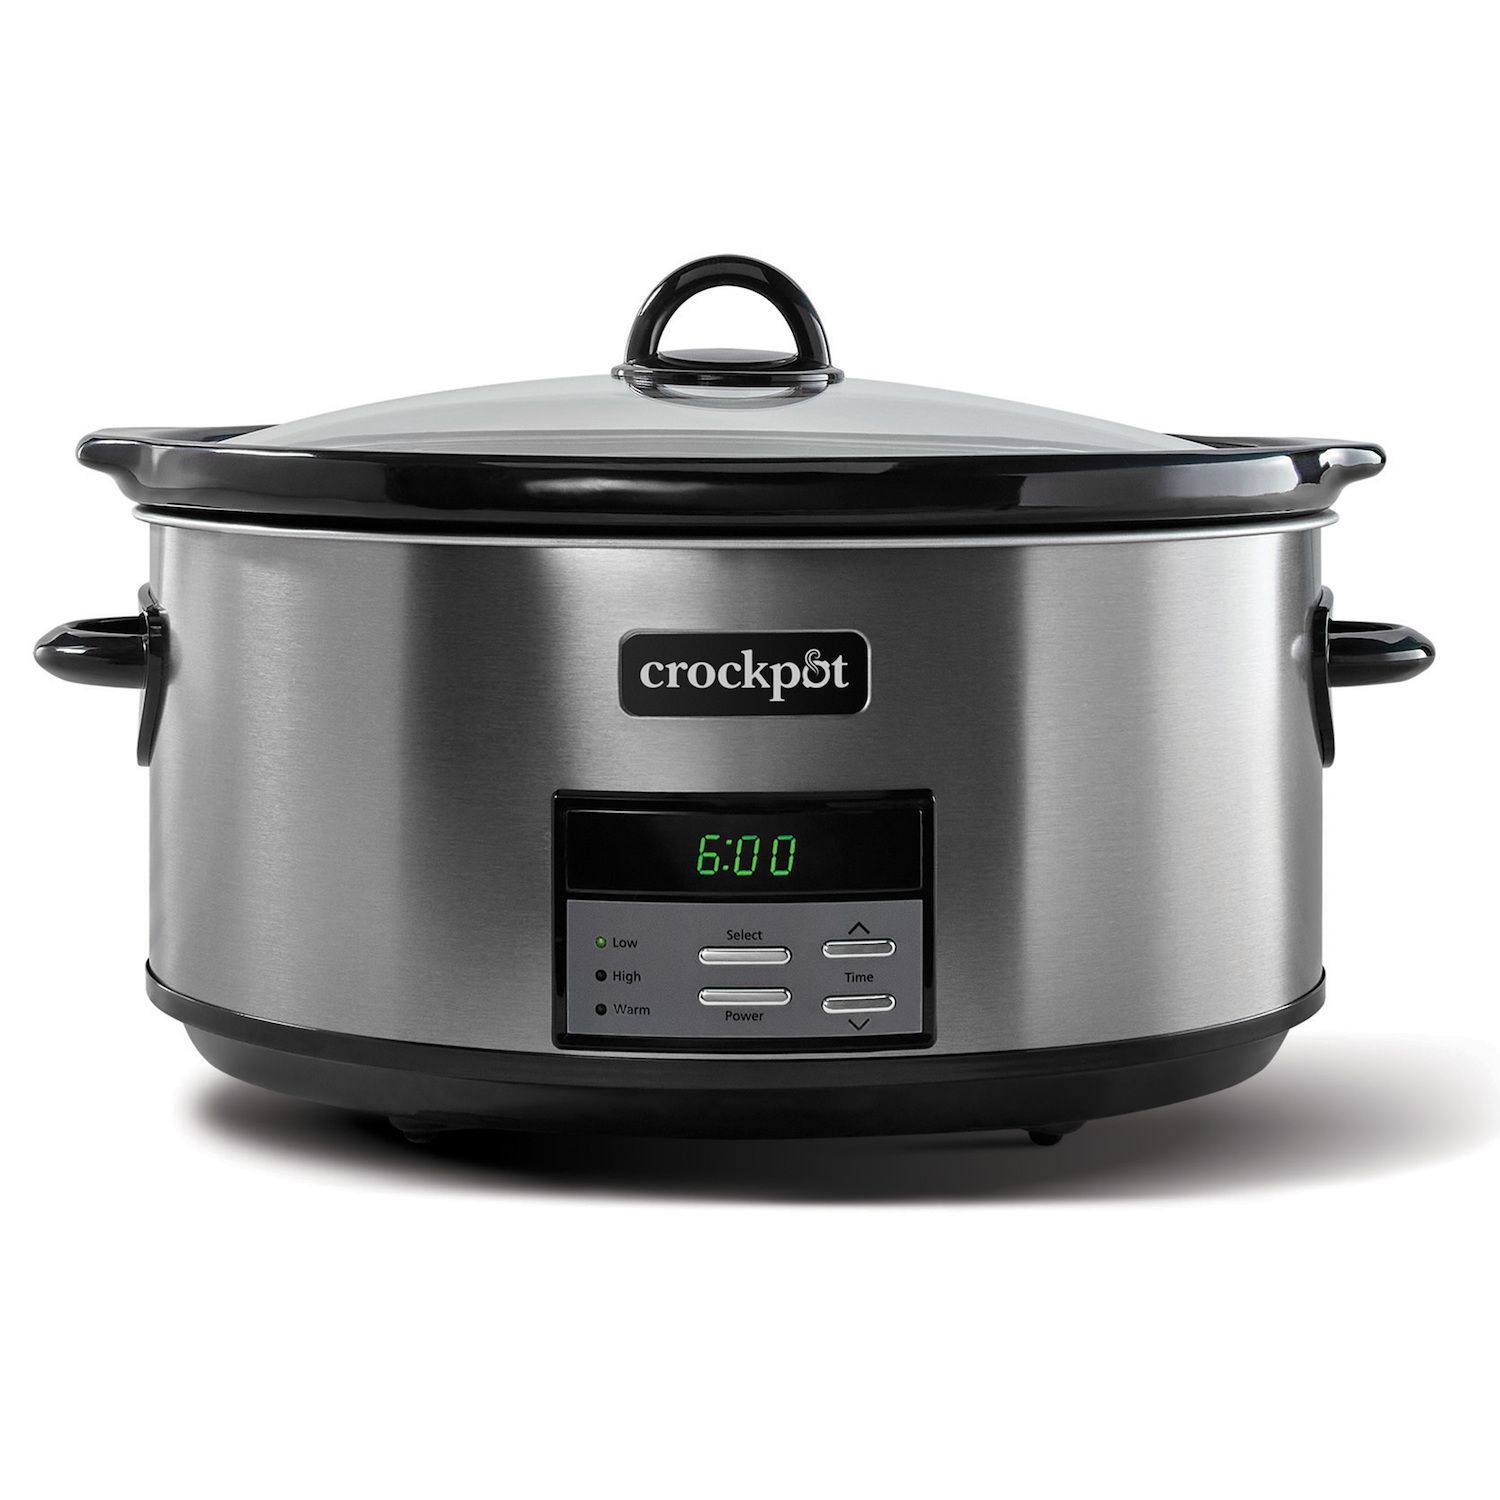 Maxi-Matic Elite Gourmet 1.5 Qt. Mini Slow Cooker in Stainless Steel